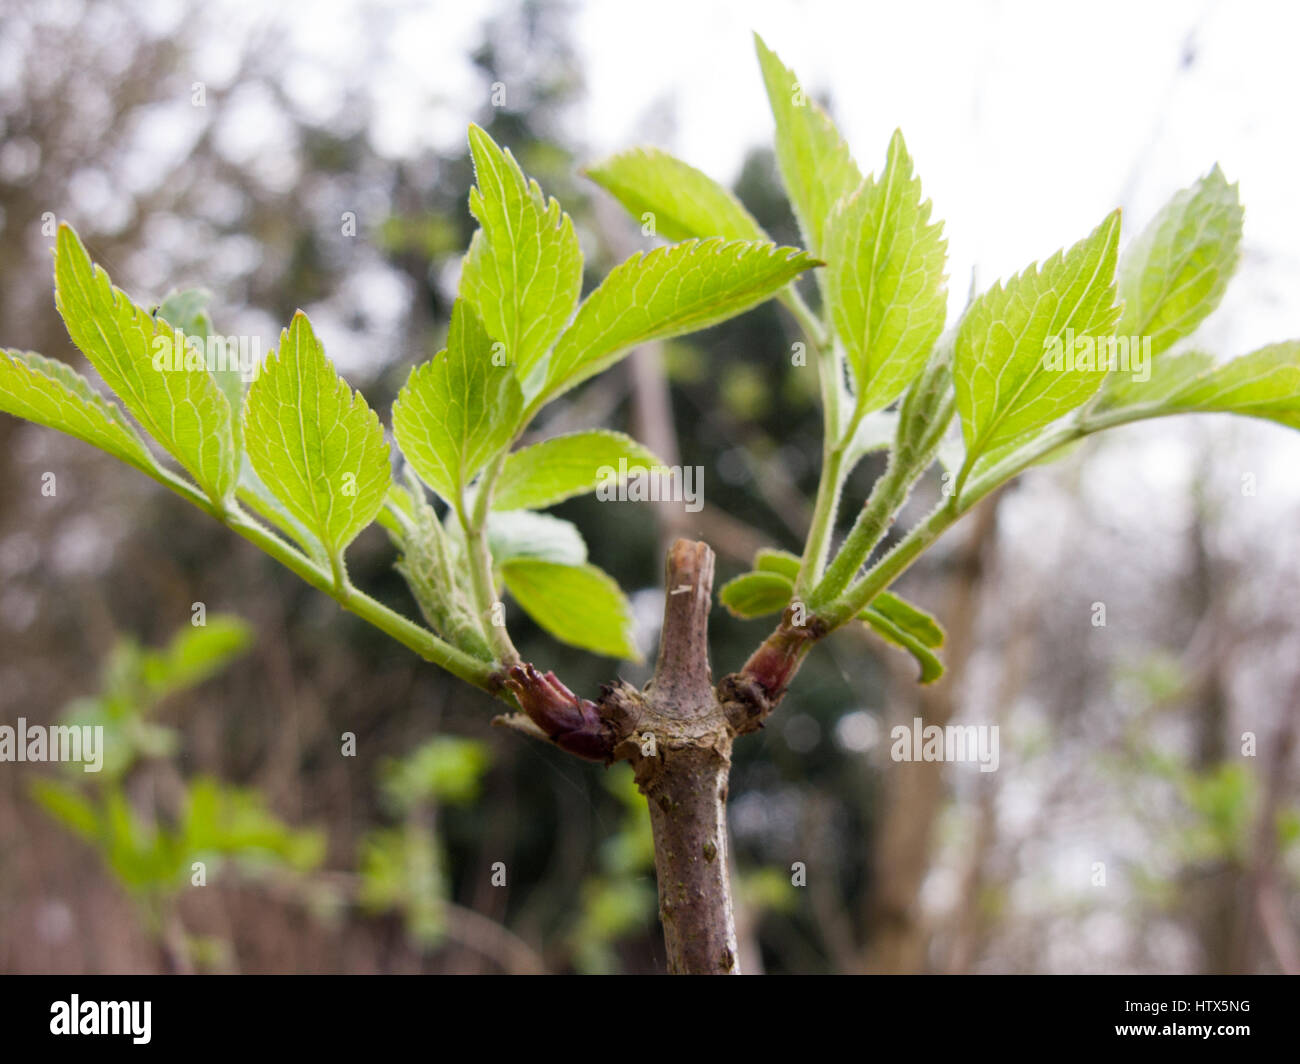 Some new shoots arising in spring time Stock Photo